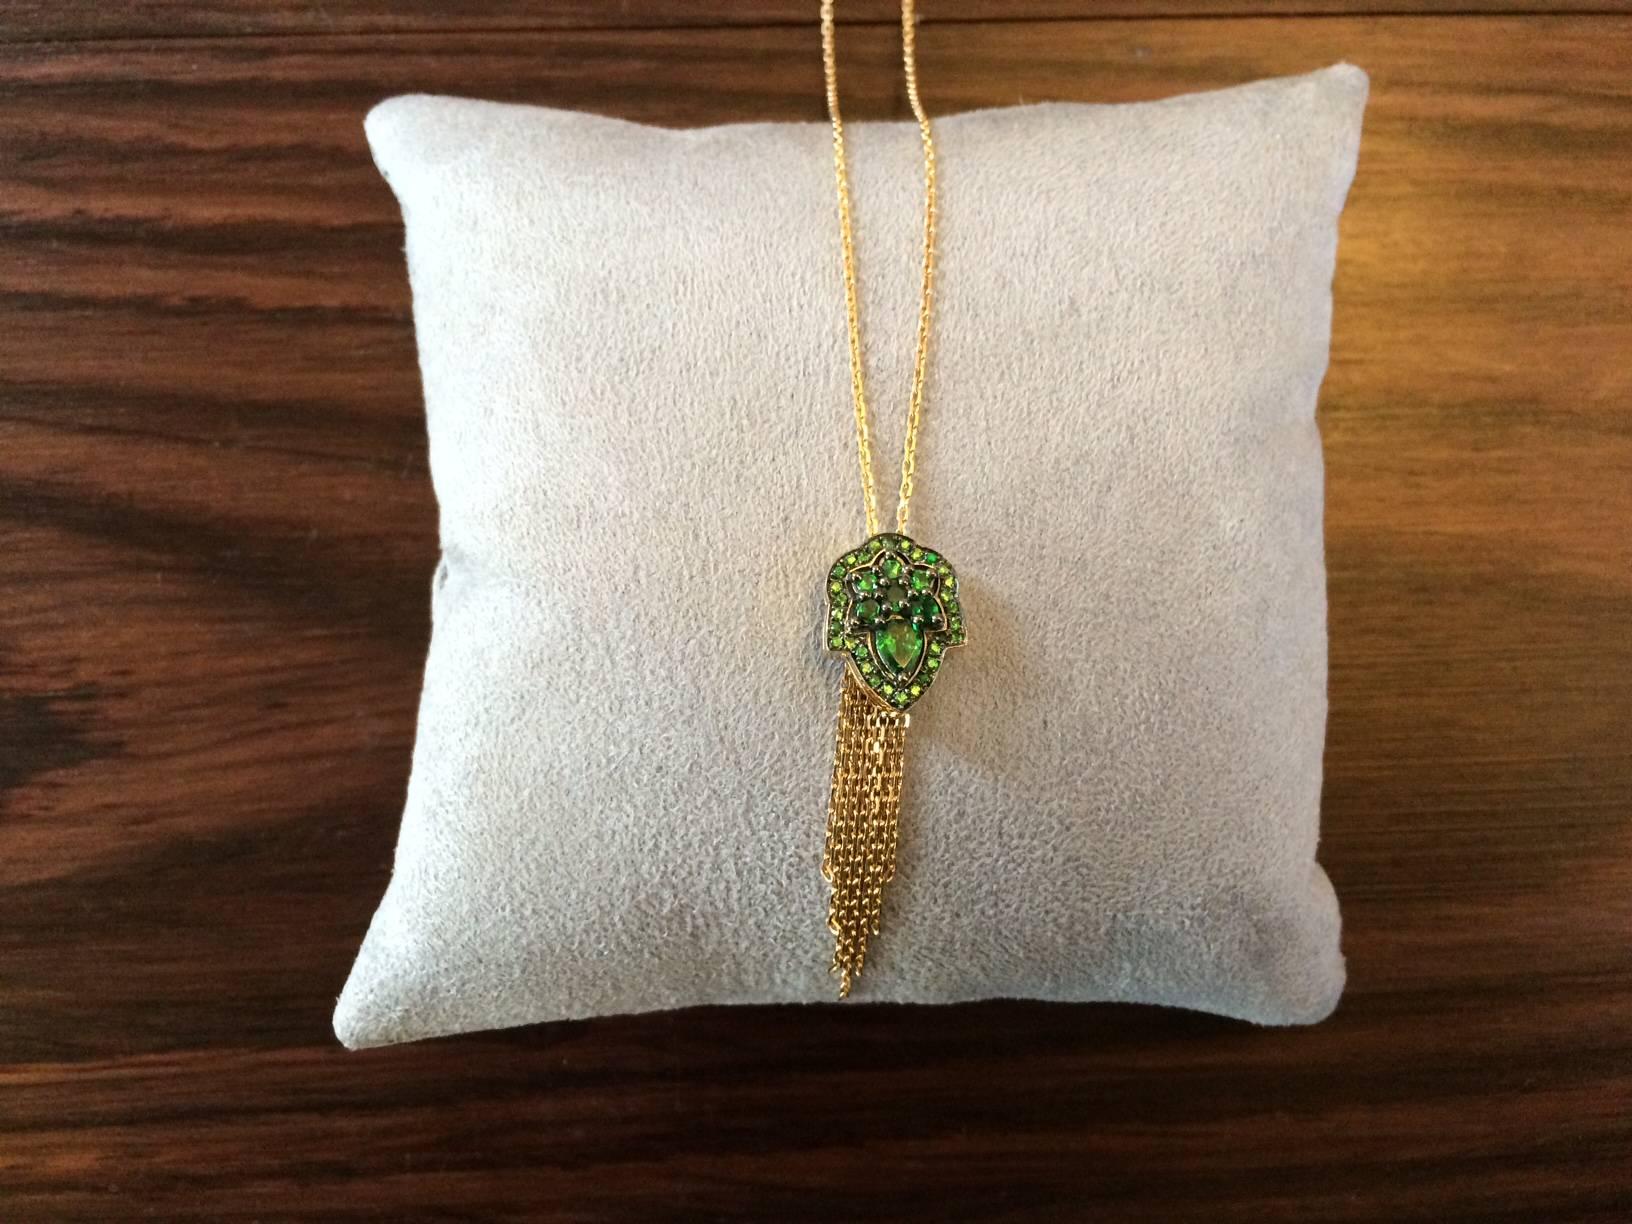 This pendant is handcrafted in London using 18ct yellow gold and is set with 1.20ct of vivid green natural tsavorites. The top of the pendant has a black rhodium finish to contrast with the yellow gold and the tsavorites. 

length of pendant